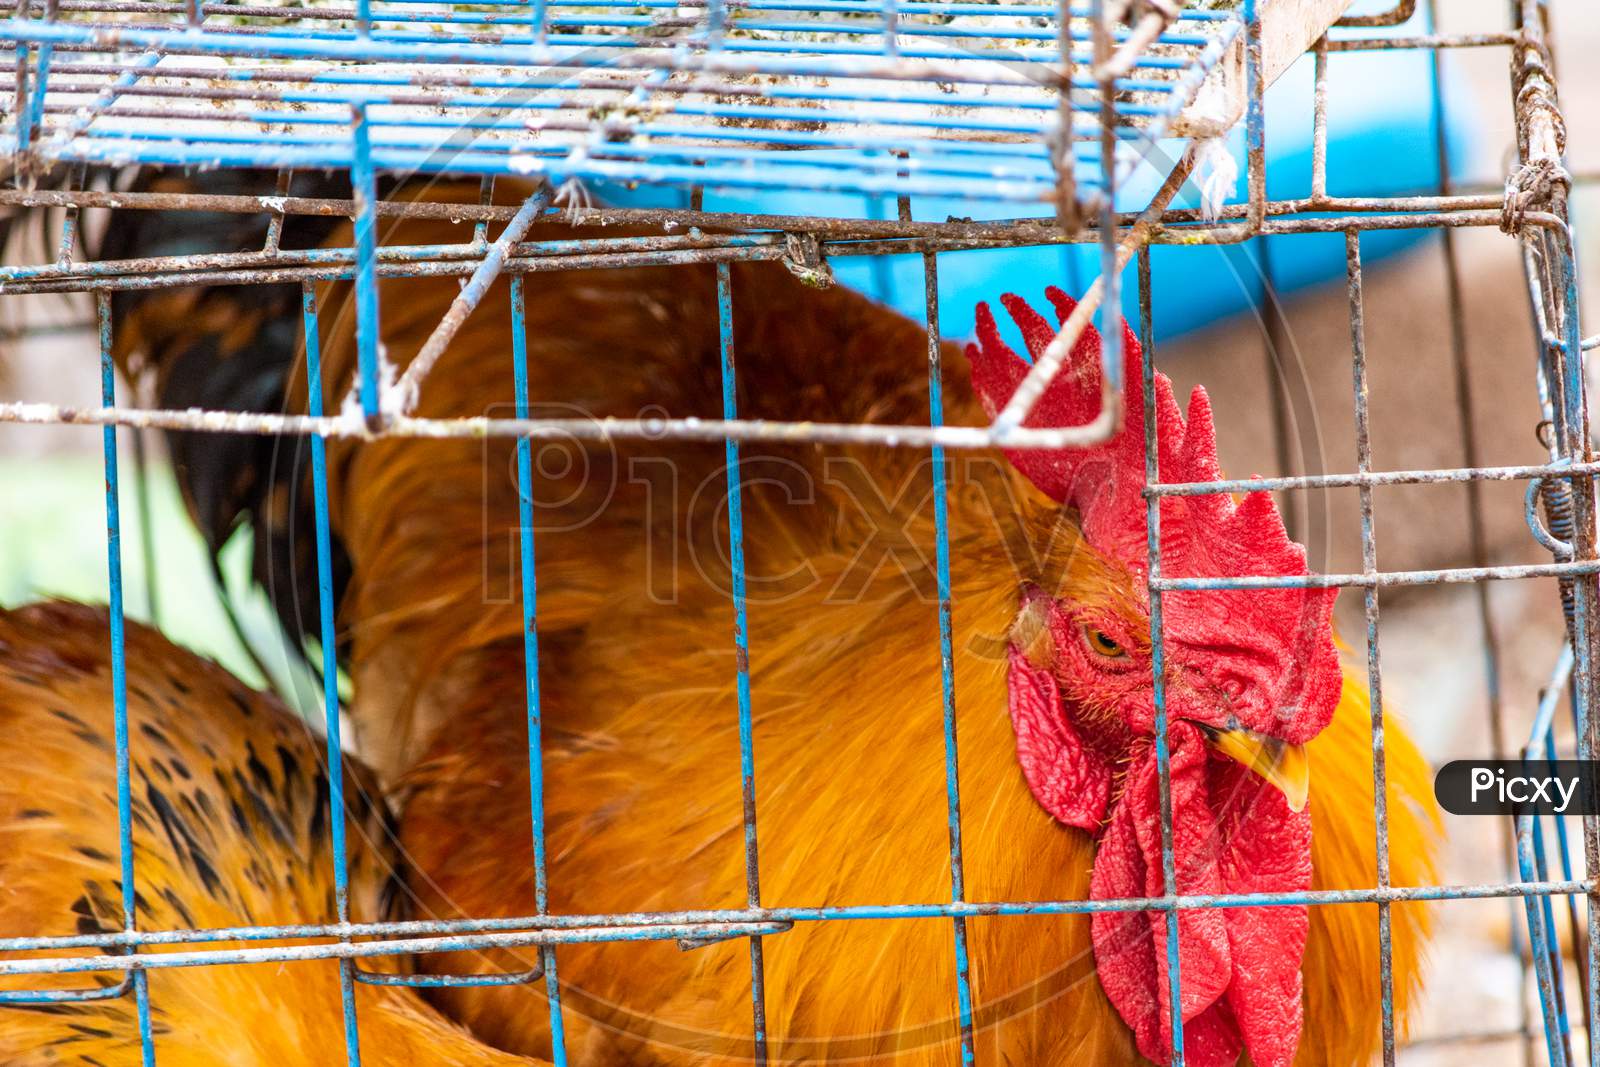 A Rooster In A Metal Wire Cage, On Sale At Street Market In Qingdao, China